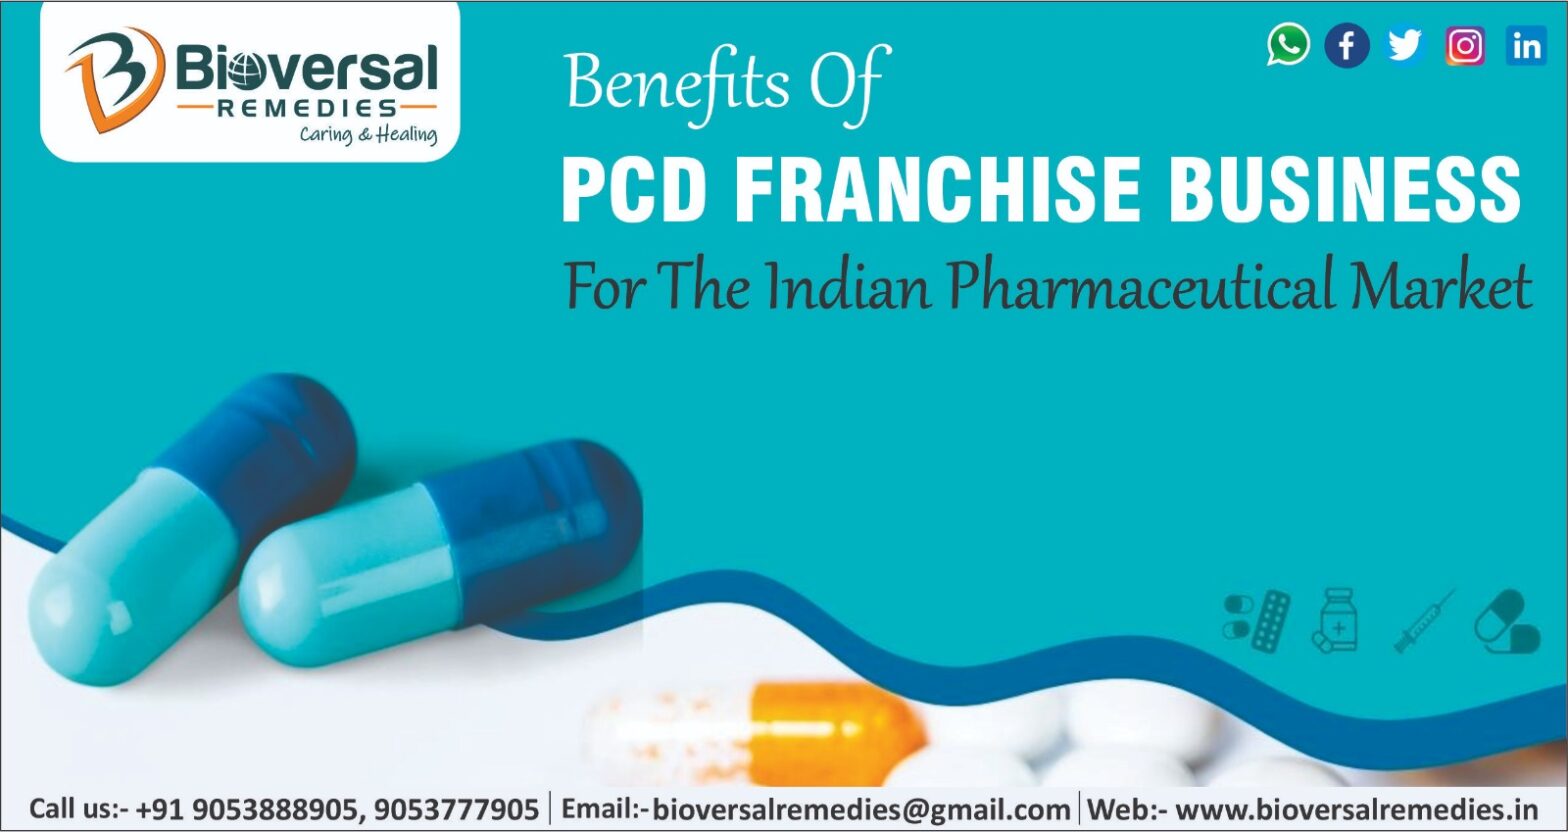 Benefits of Franchise Business for Indian Pharmaceutical Market